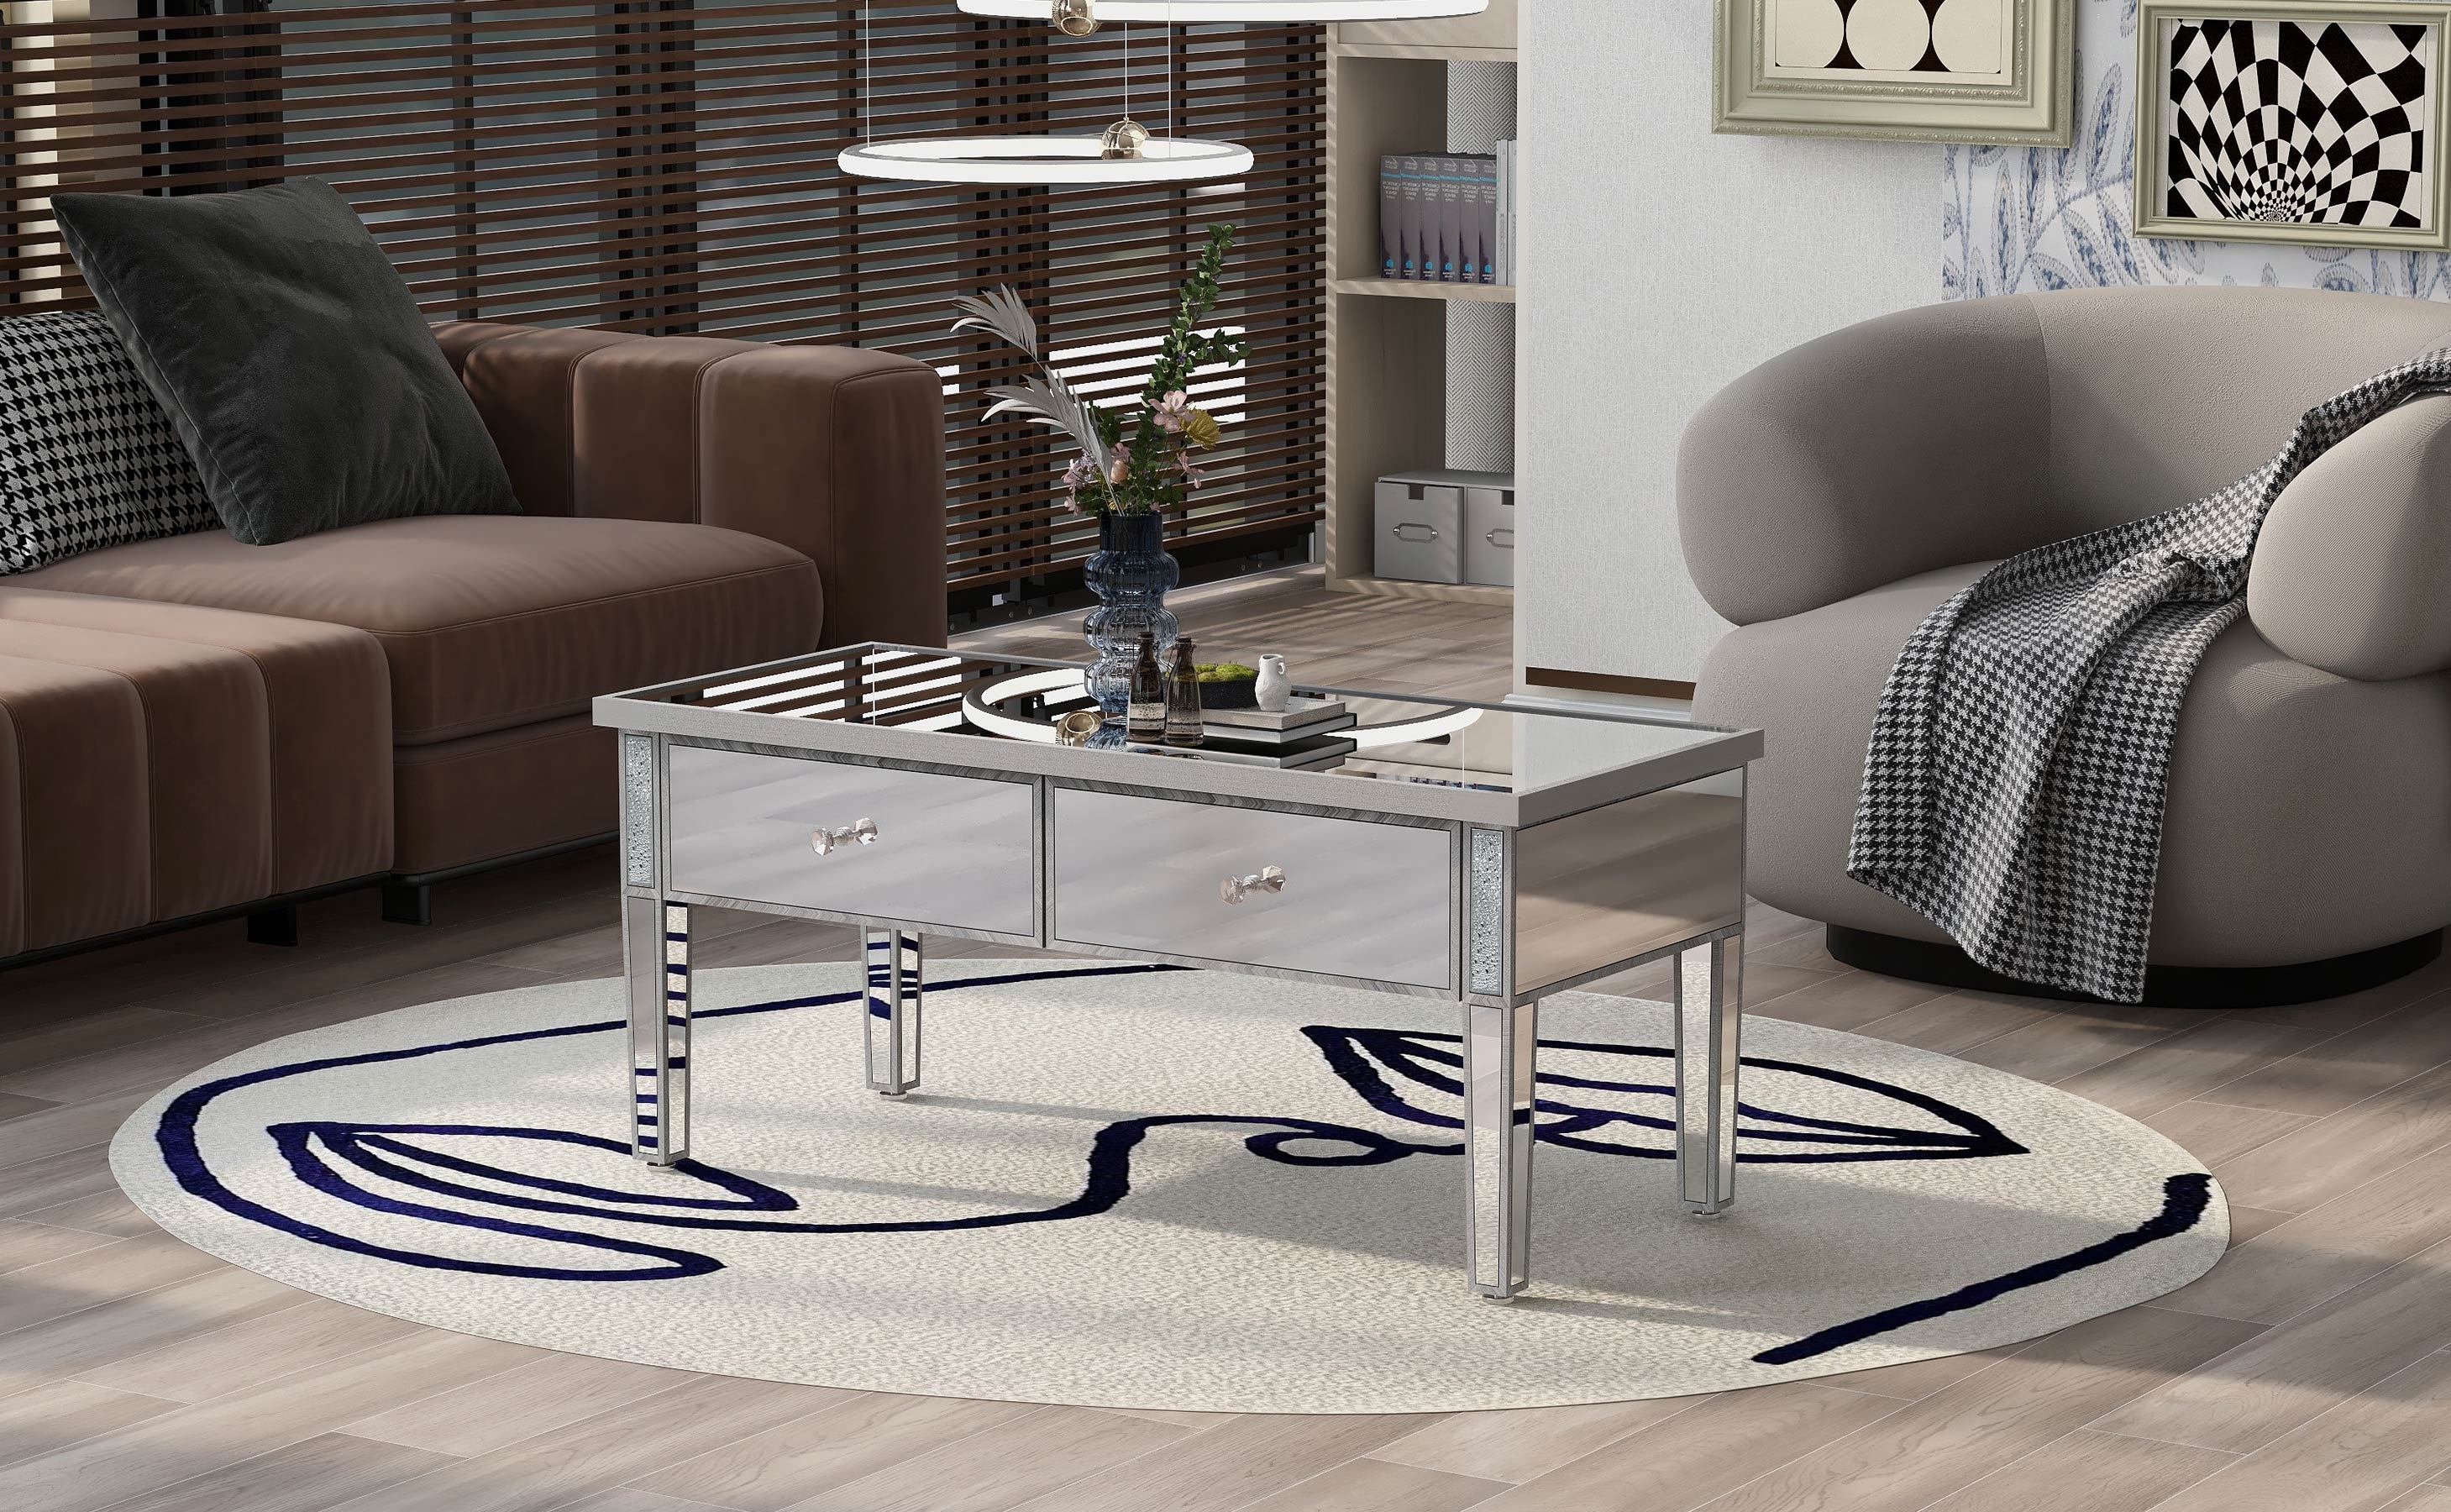 Modern Glass Mirrored Coffee Table with 2 Drawers, Cocktail Table with Crystal Handles and Adjustable Height Legs - Silver